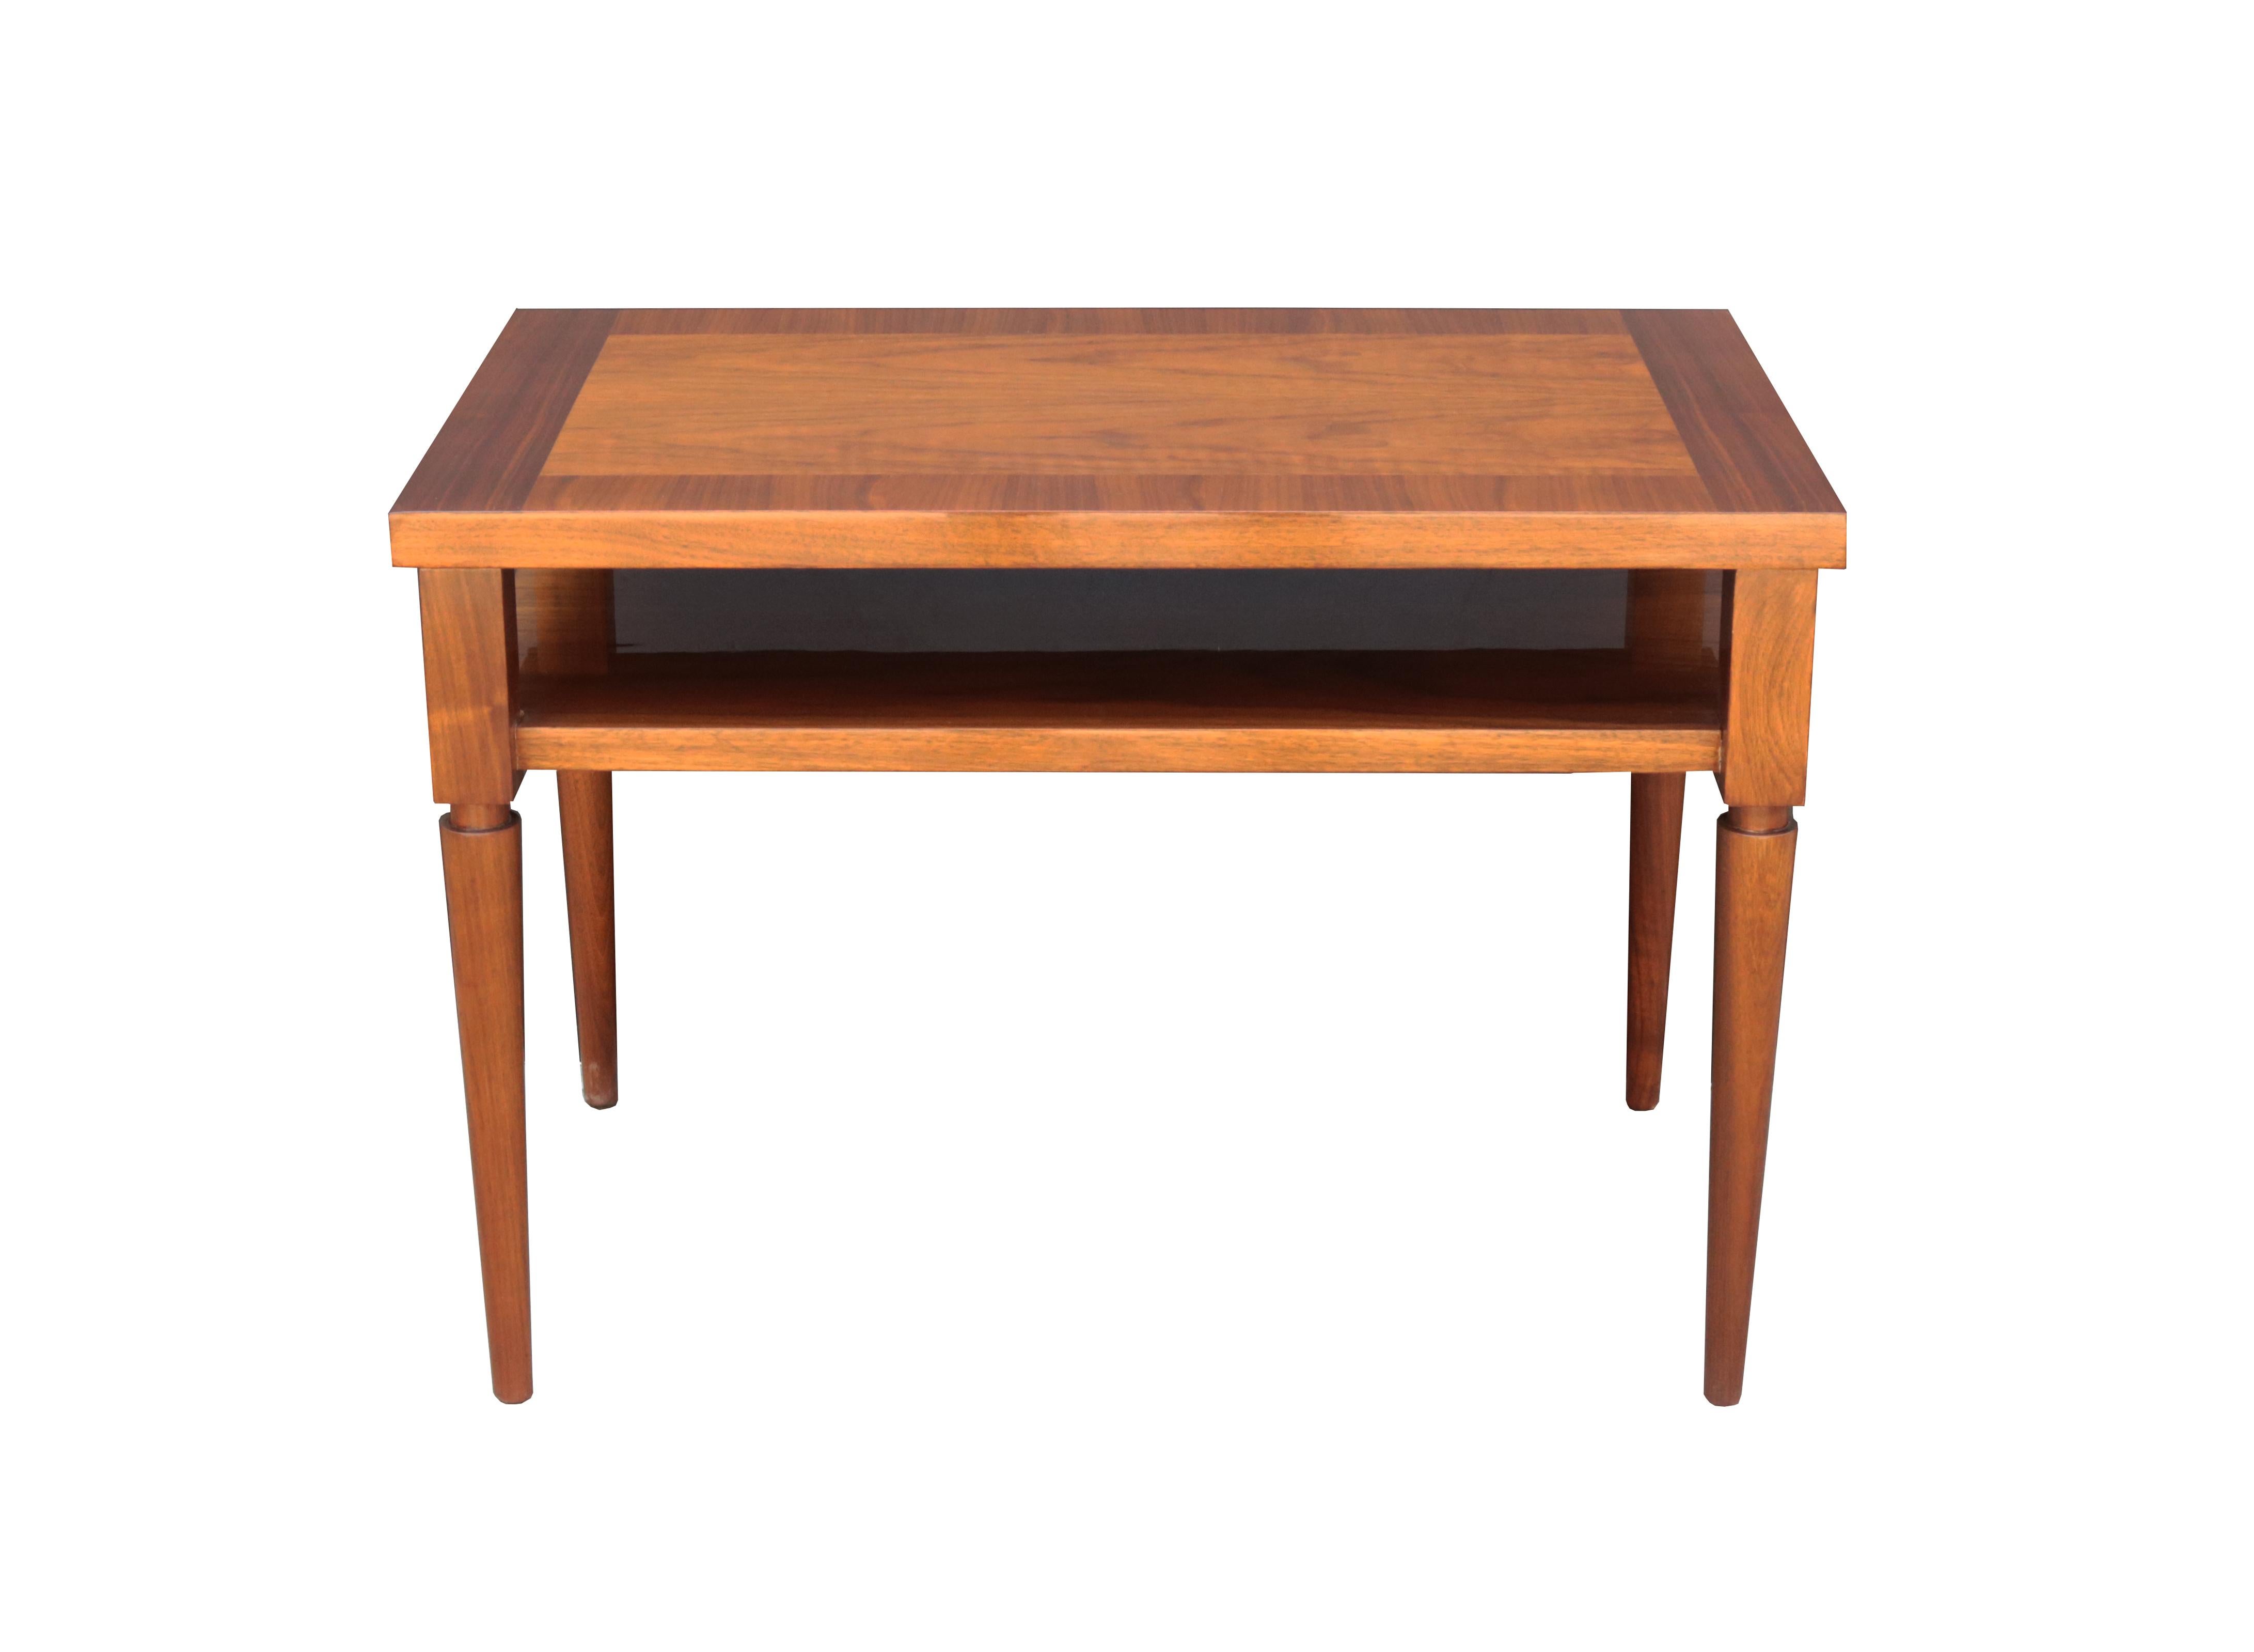 Pair of Robsjohn-Gibbings for Widdicomb end tables. Two-tier tables in mahogany.
Perfect professional restoration.